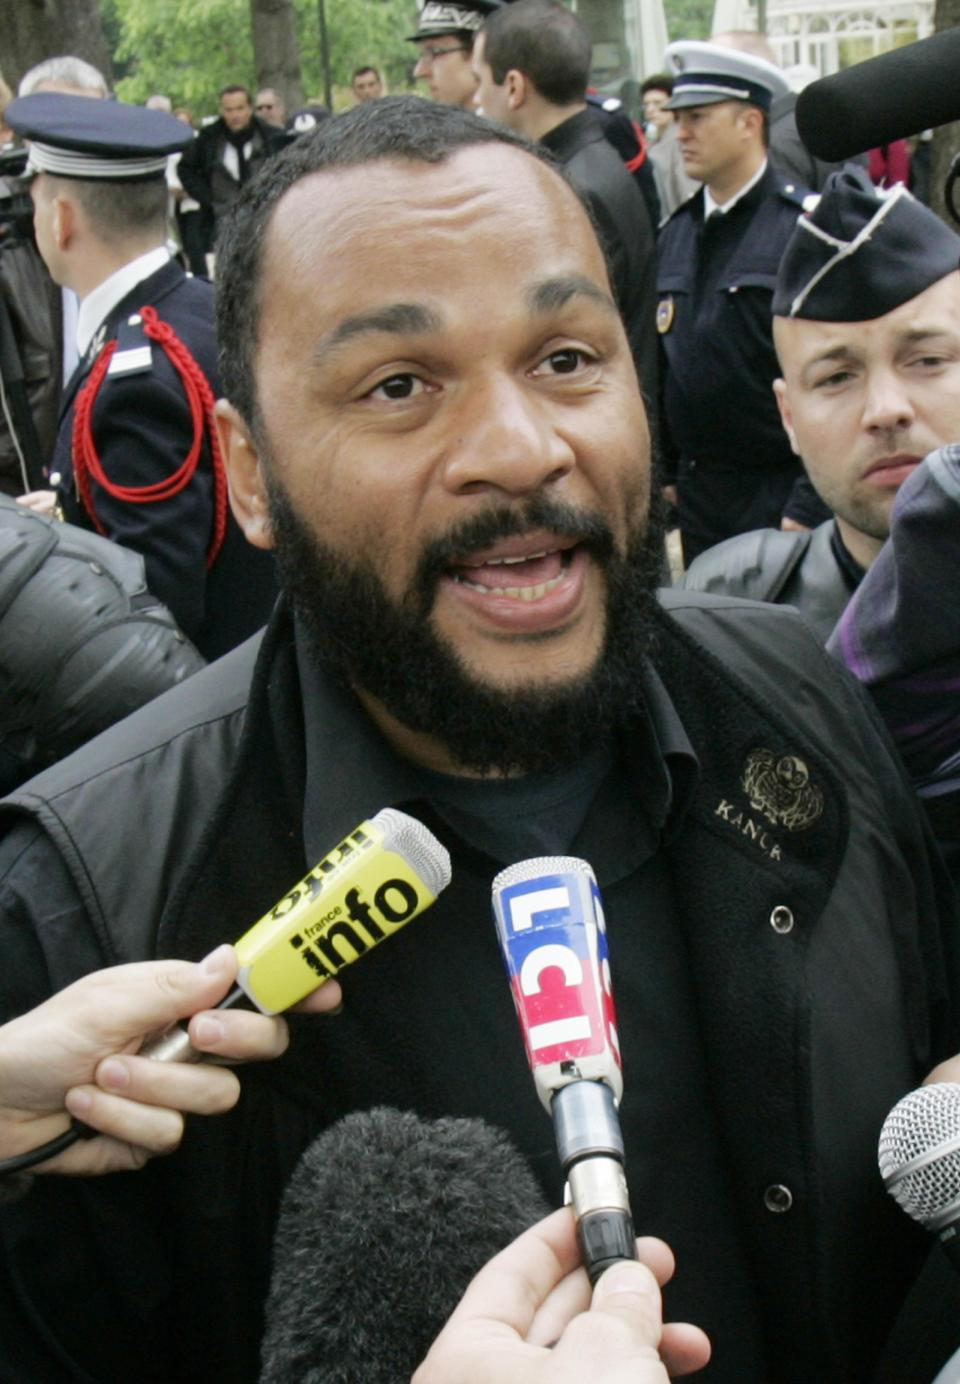 FILE - In this May 13, 2009 file photo, controversial French comic Dieudonne M'Bala M'Bala, known as Dieudonne, answers reporters as he heads for the interior Ministry to submit a list of candidates for the upcoming European elections, in Paris. The Paris prosecutor's office said Thursday Jan. 2, 2013, it is investigating threats against a comedian the French interior minister wants banned from the stage for what he says are racist and anti-Semitic performances. (AP Photo/Remy de la Mauviniere, File)